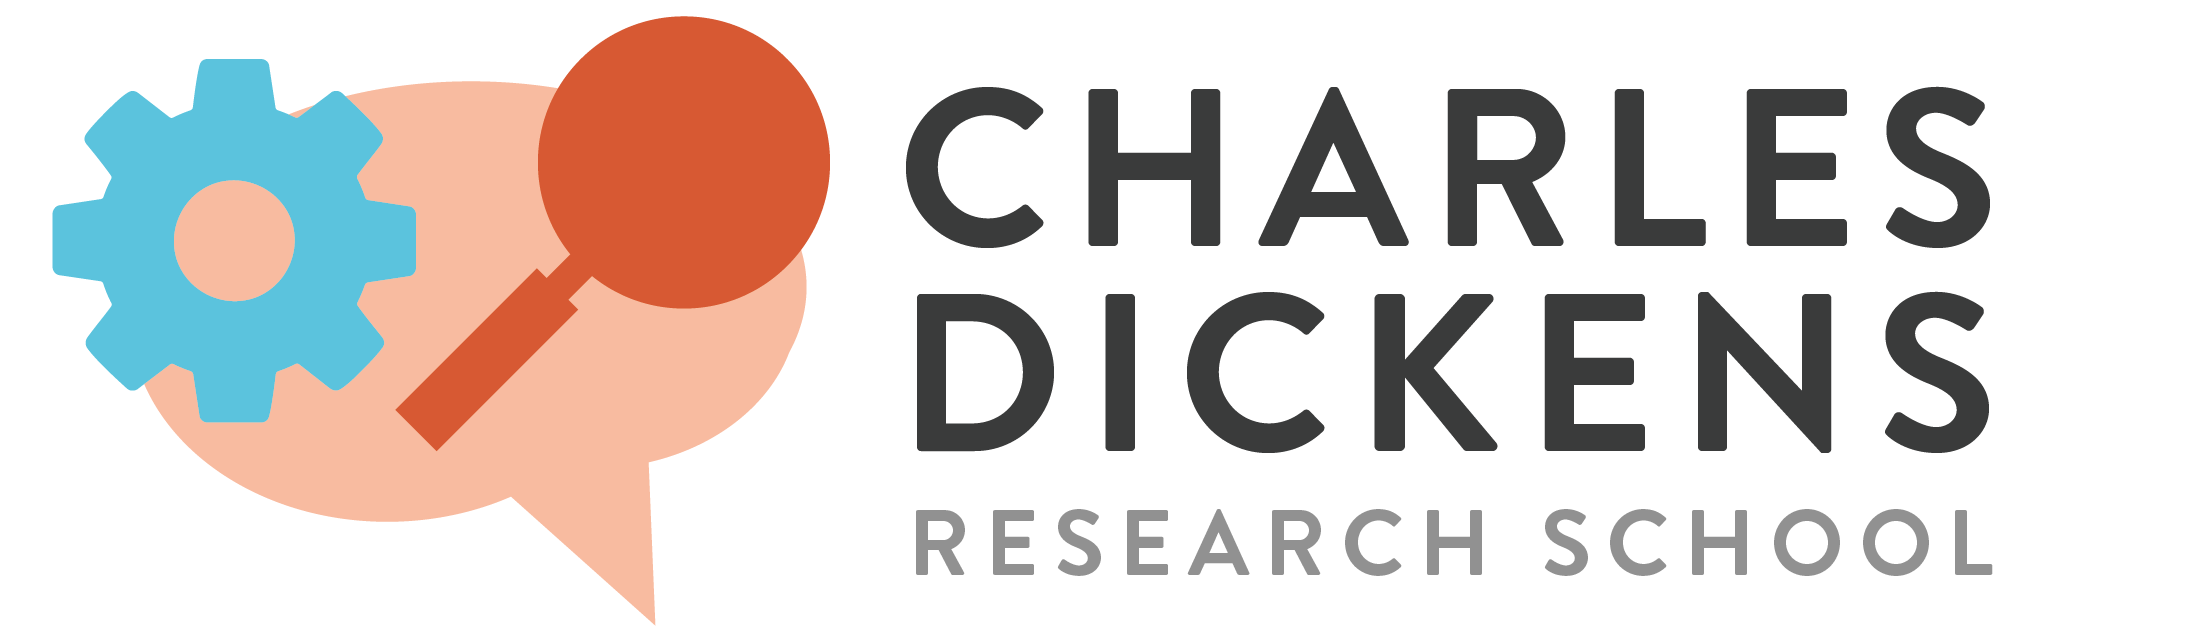 Charles Dickens Research School Logo